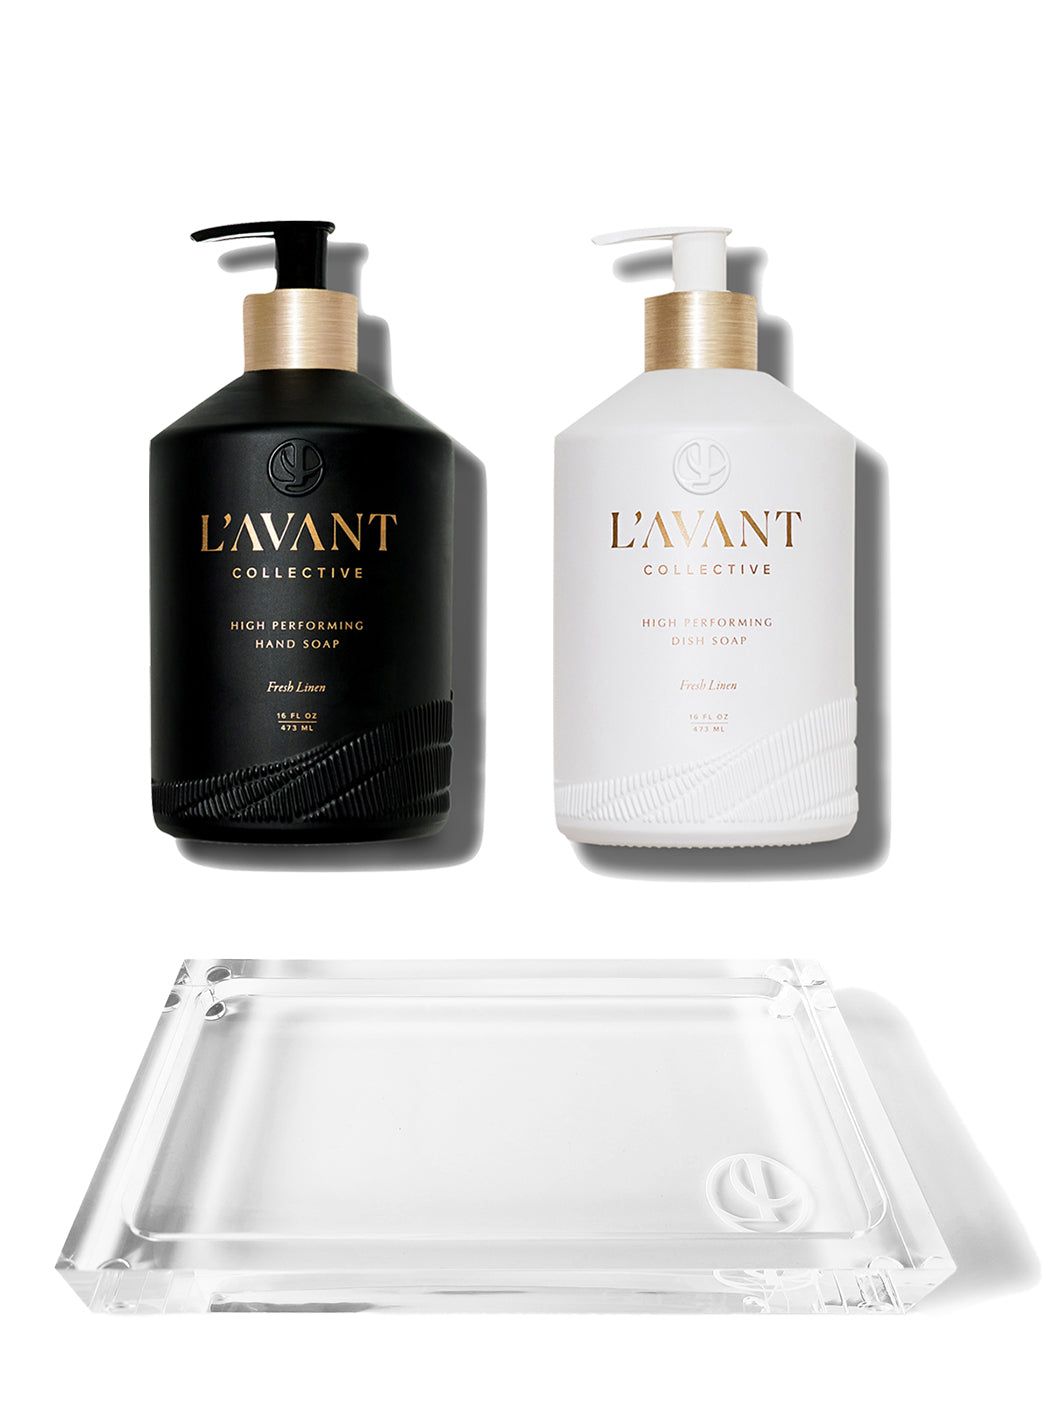 L'AVANT High Performing Dish Soap, Made In Washington